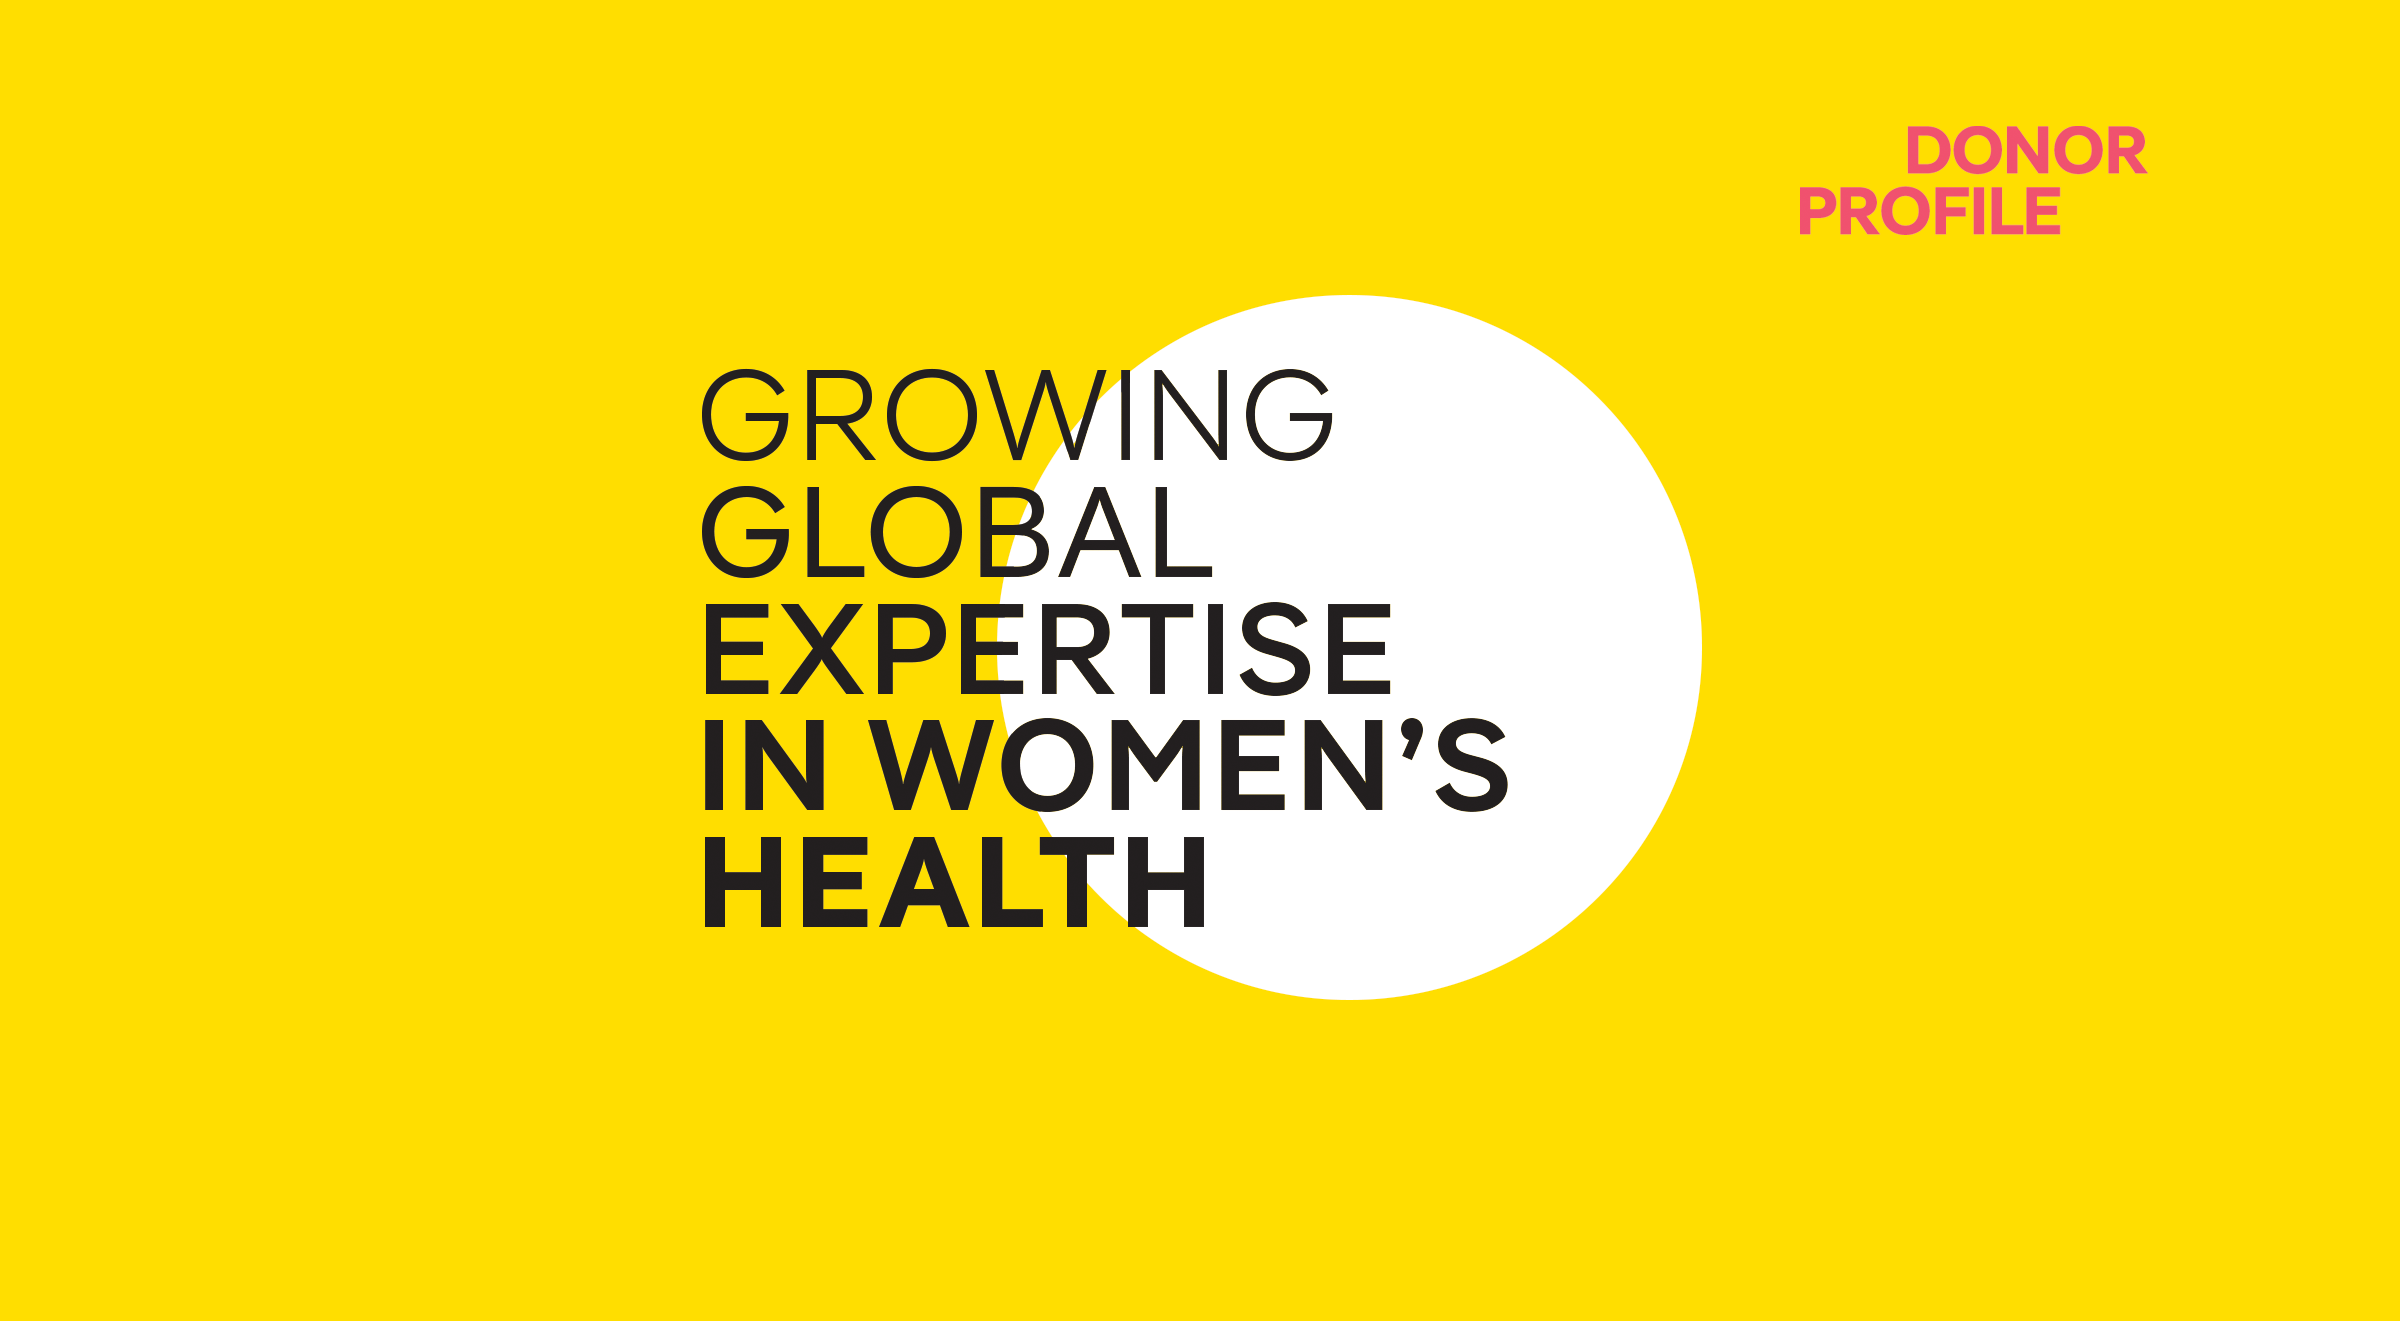 growning global expertise in women's health